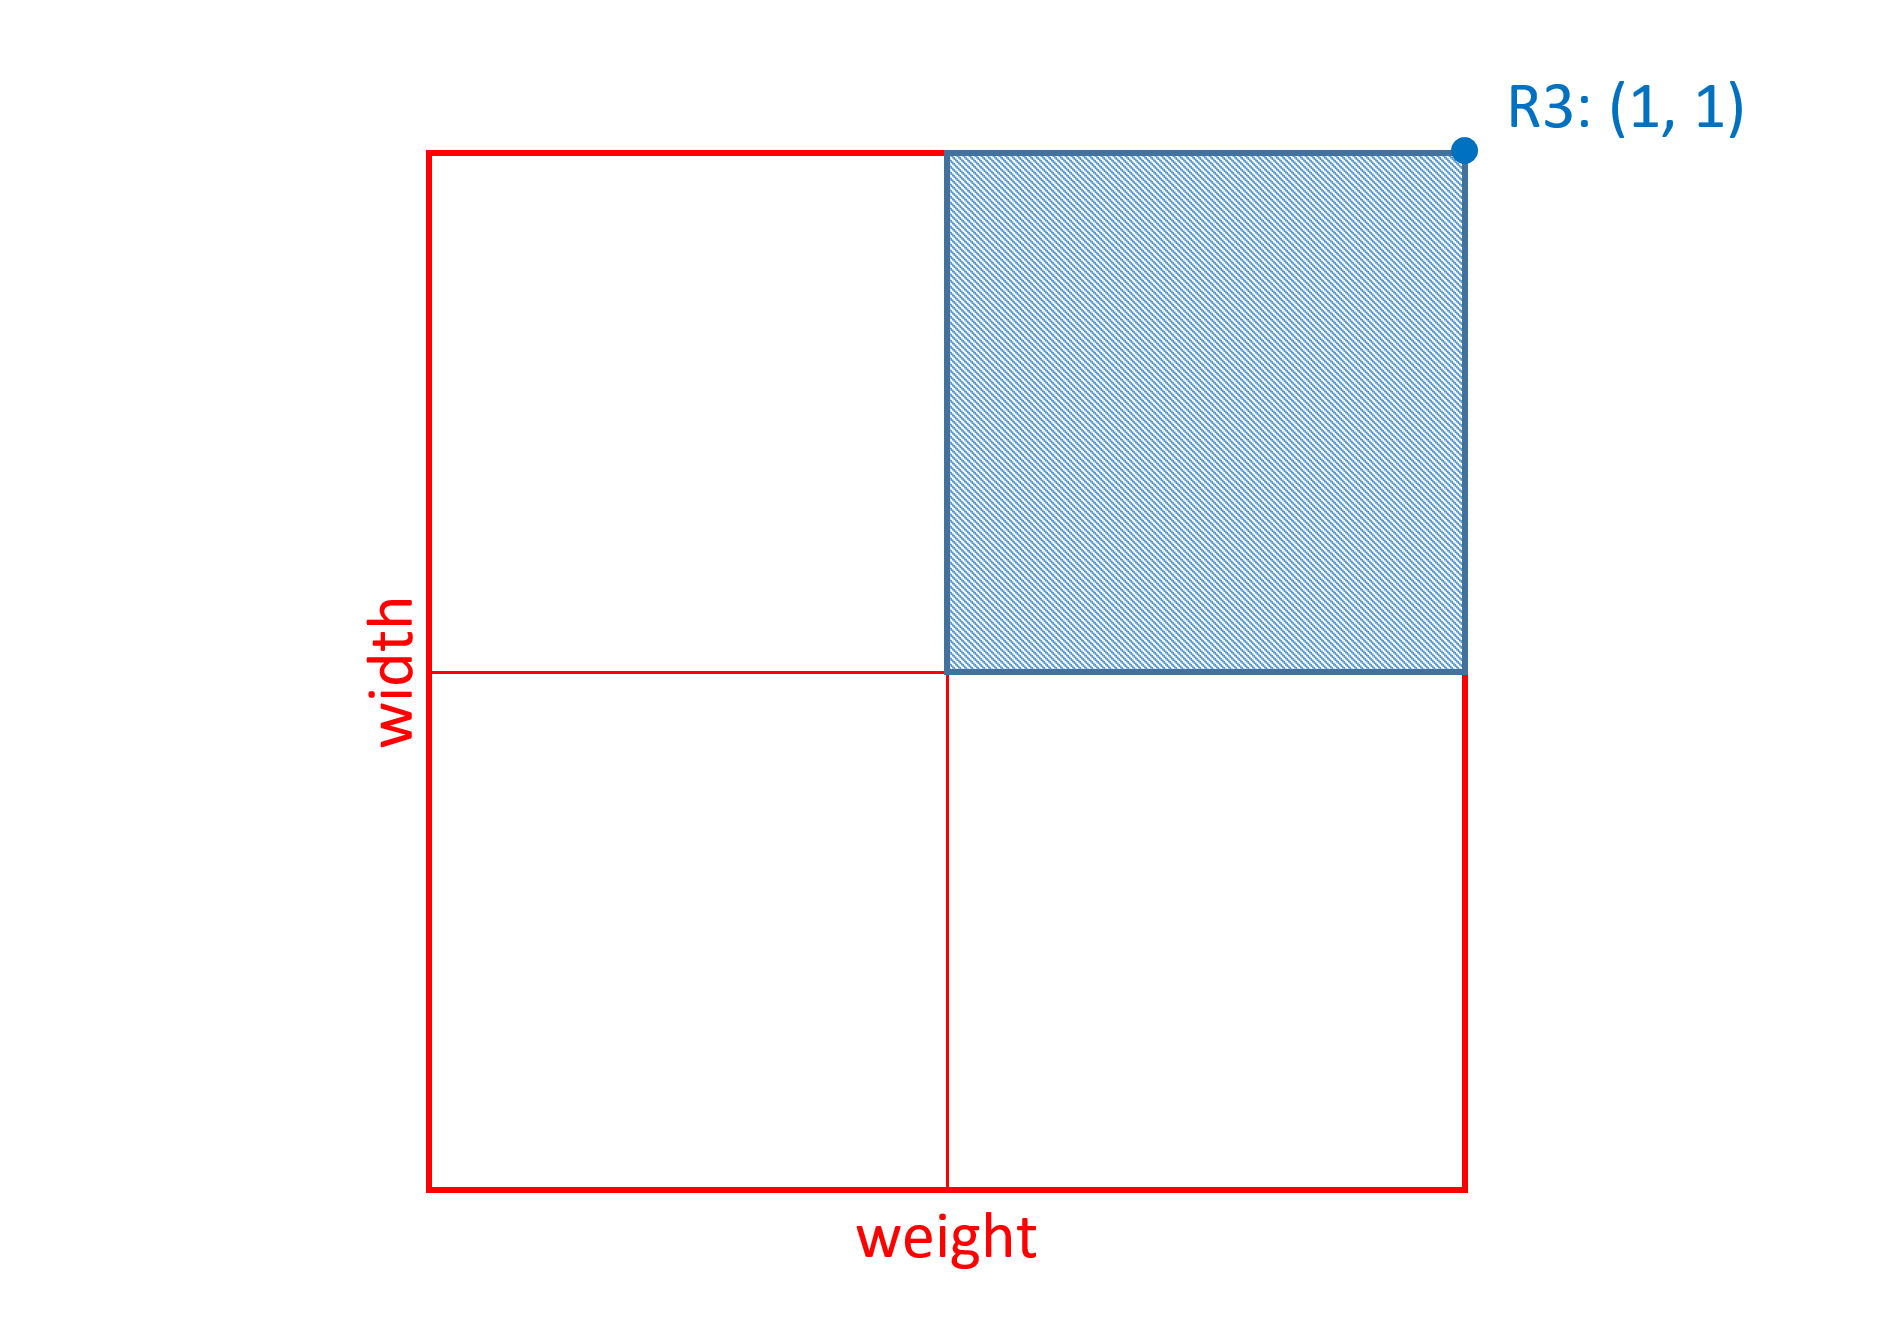 A Cartesian space with a region covering the upper right quadrant